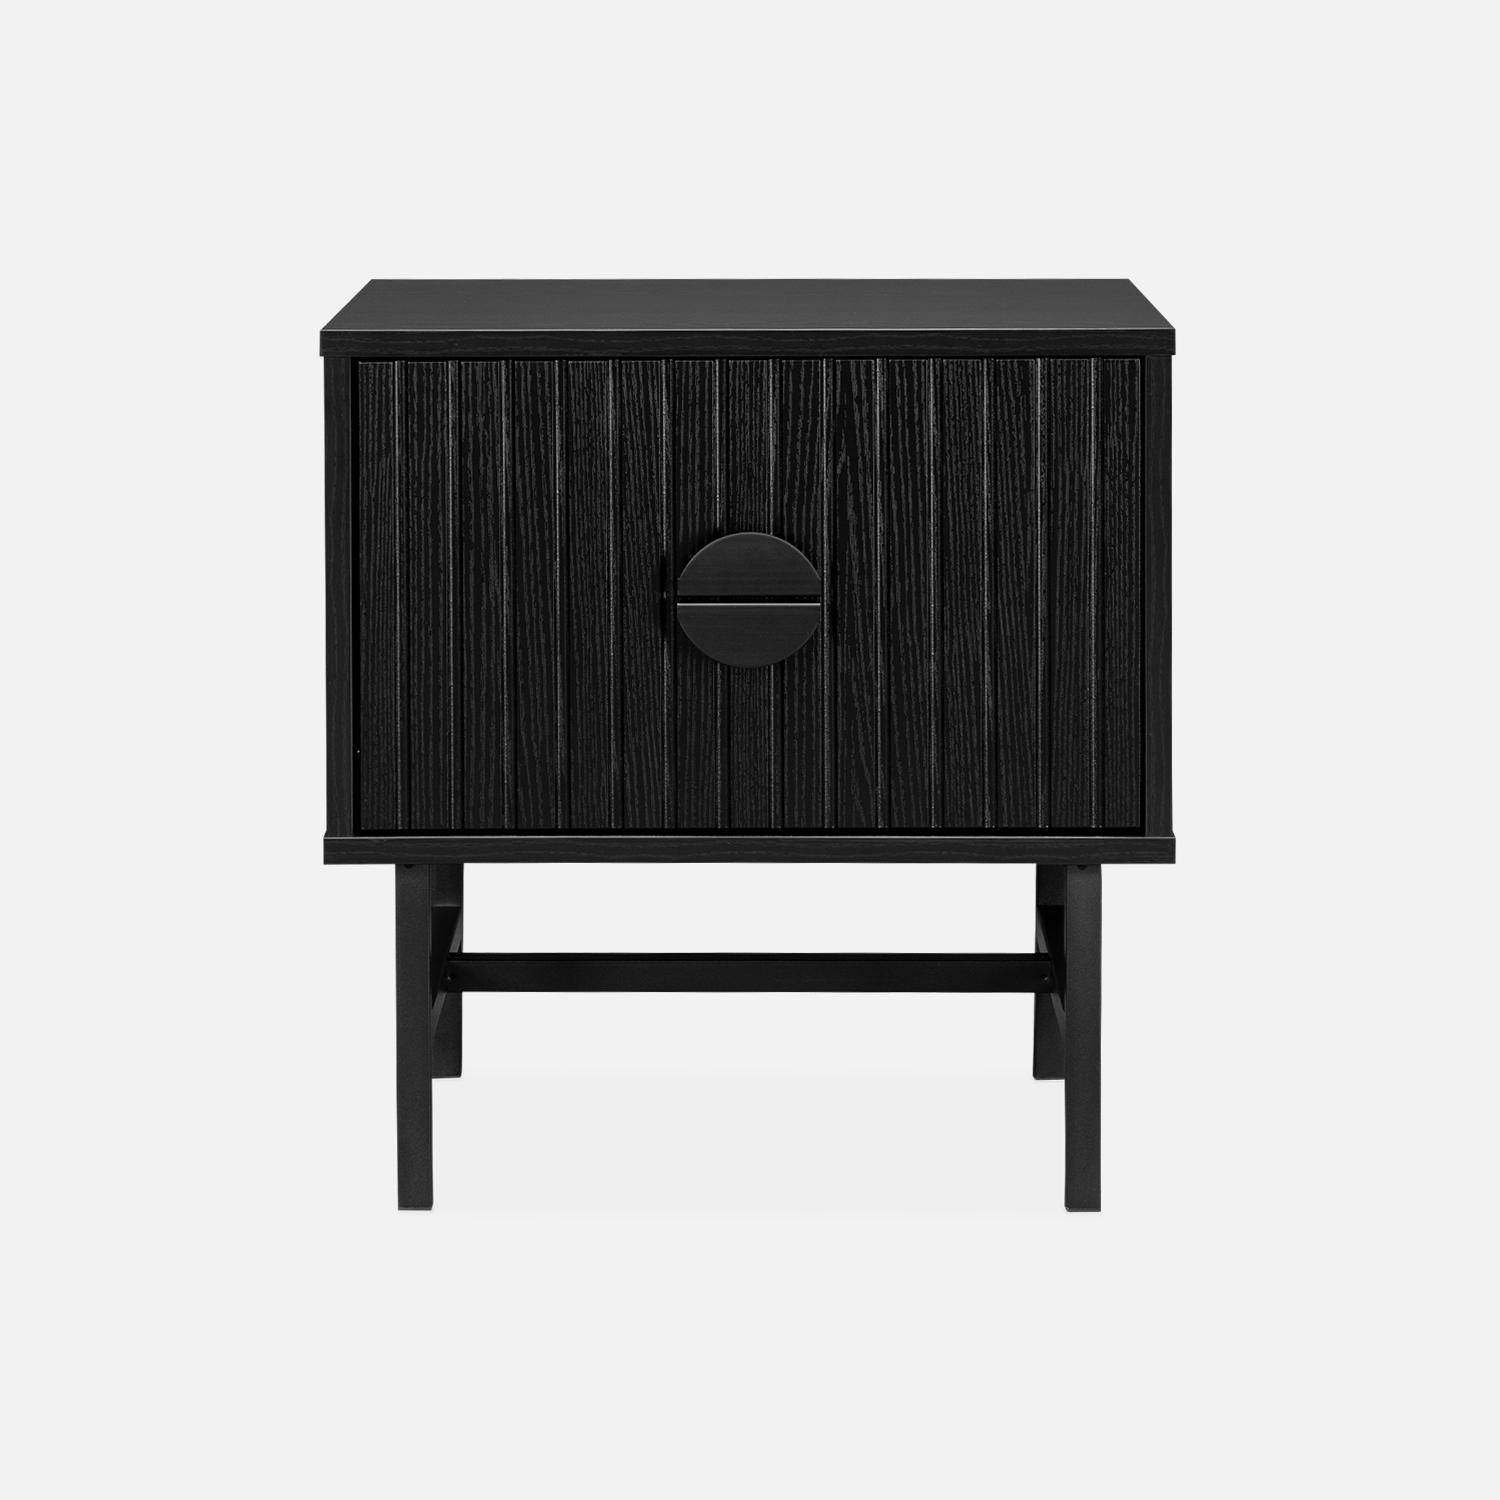 Bedside table with one drawer, ridged effect, industrial style, 48x39x50.3cm - Bazalt - Black Photo4